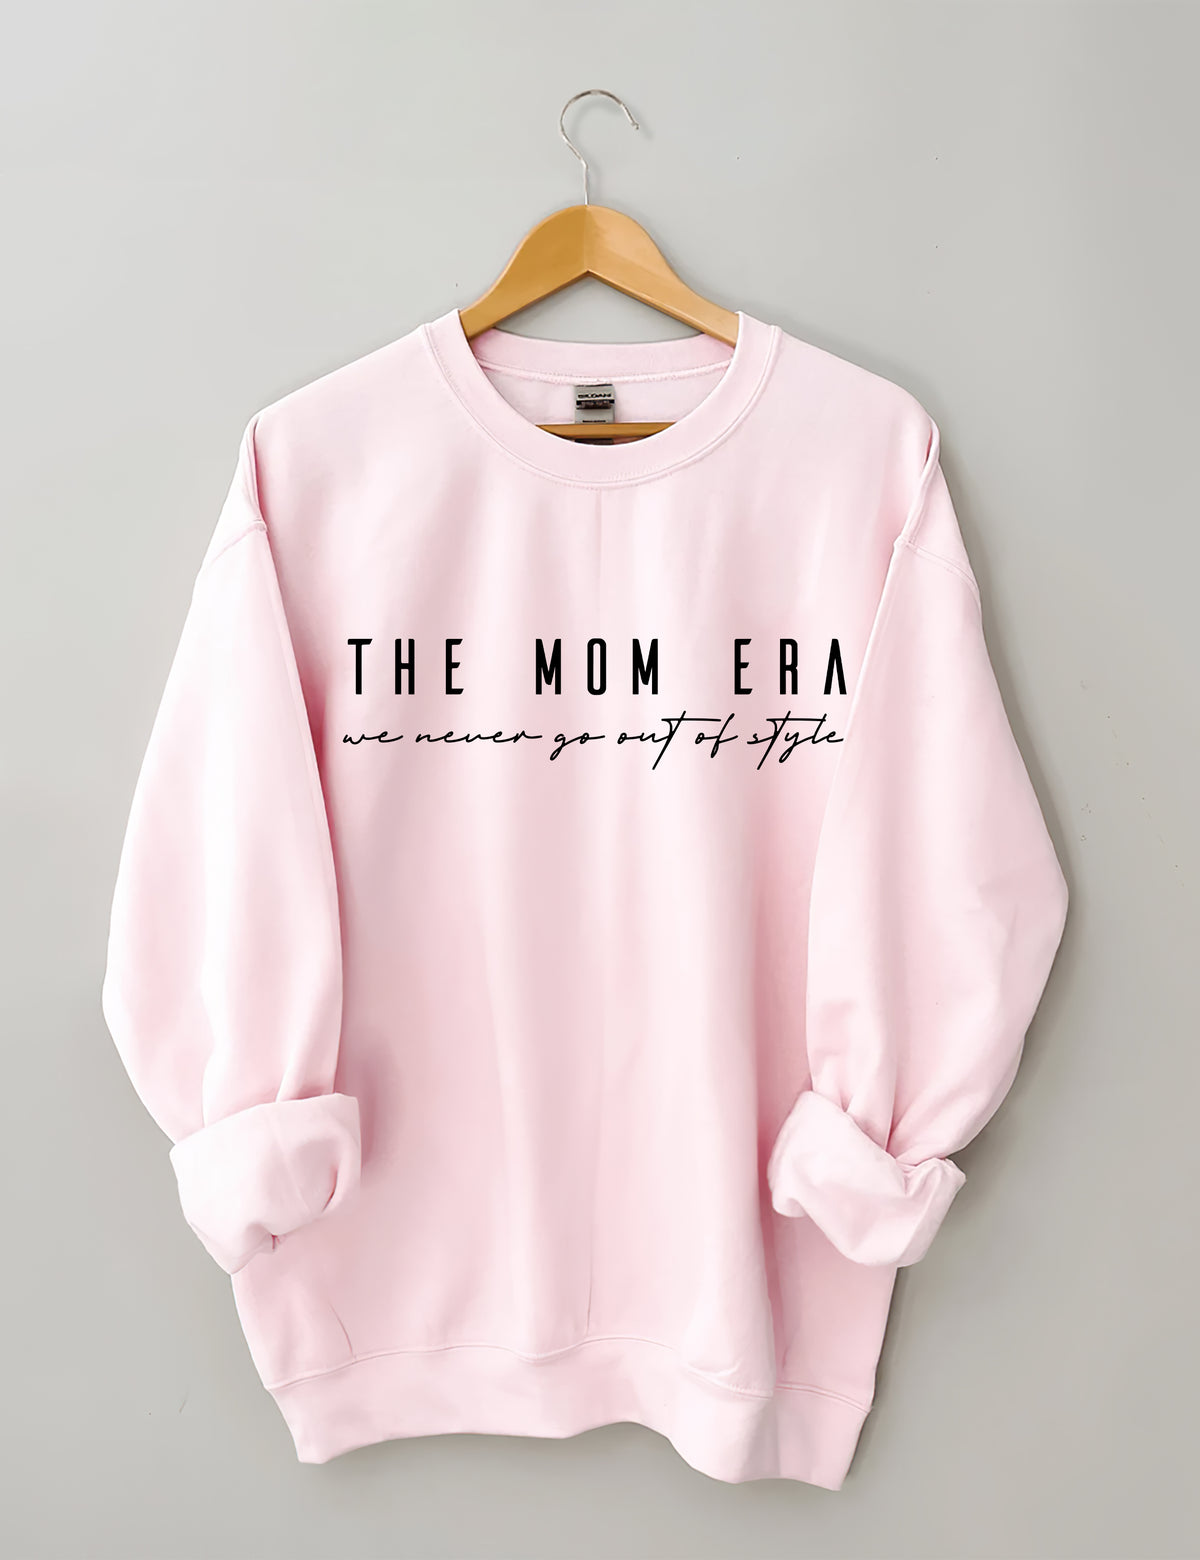 The Mom Era Are Never Go Out Of Style Sweatshirt